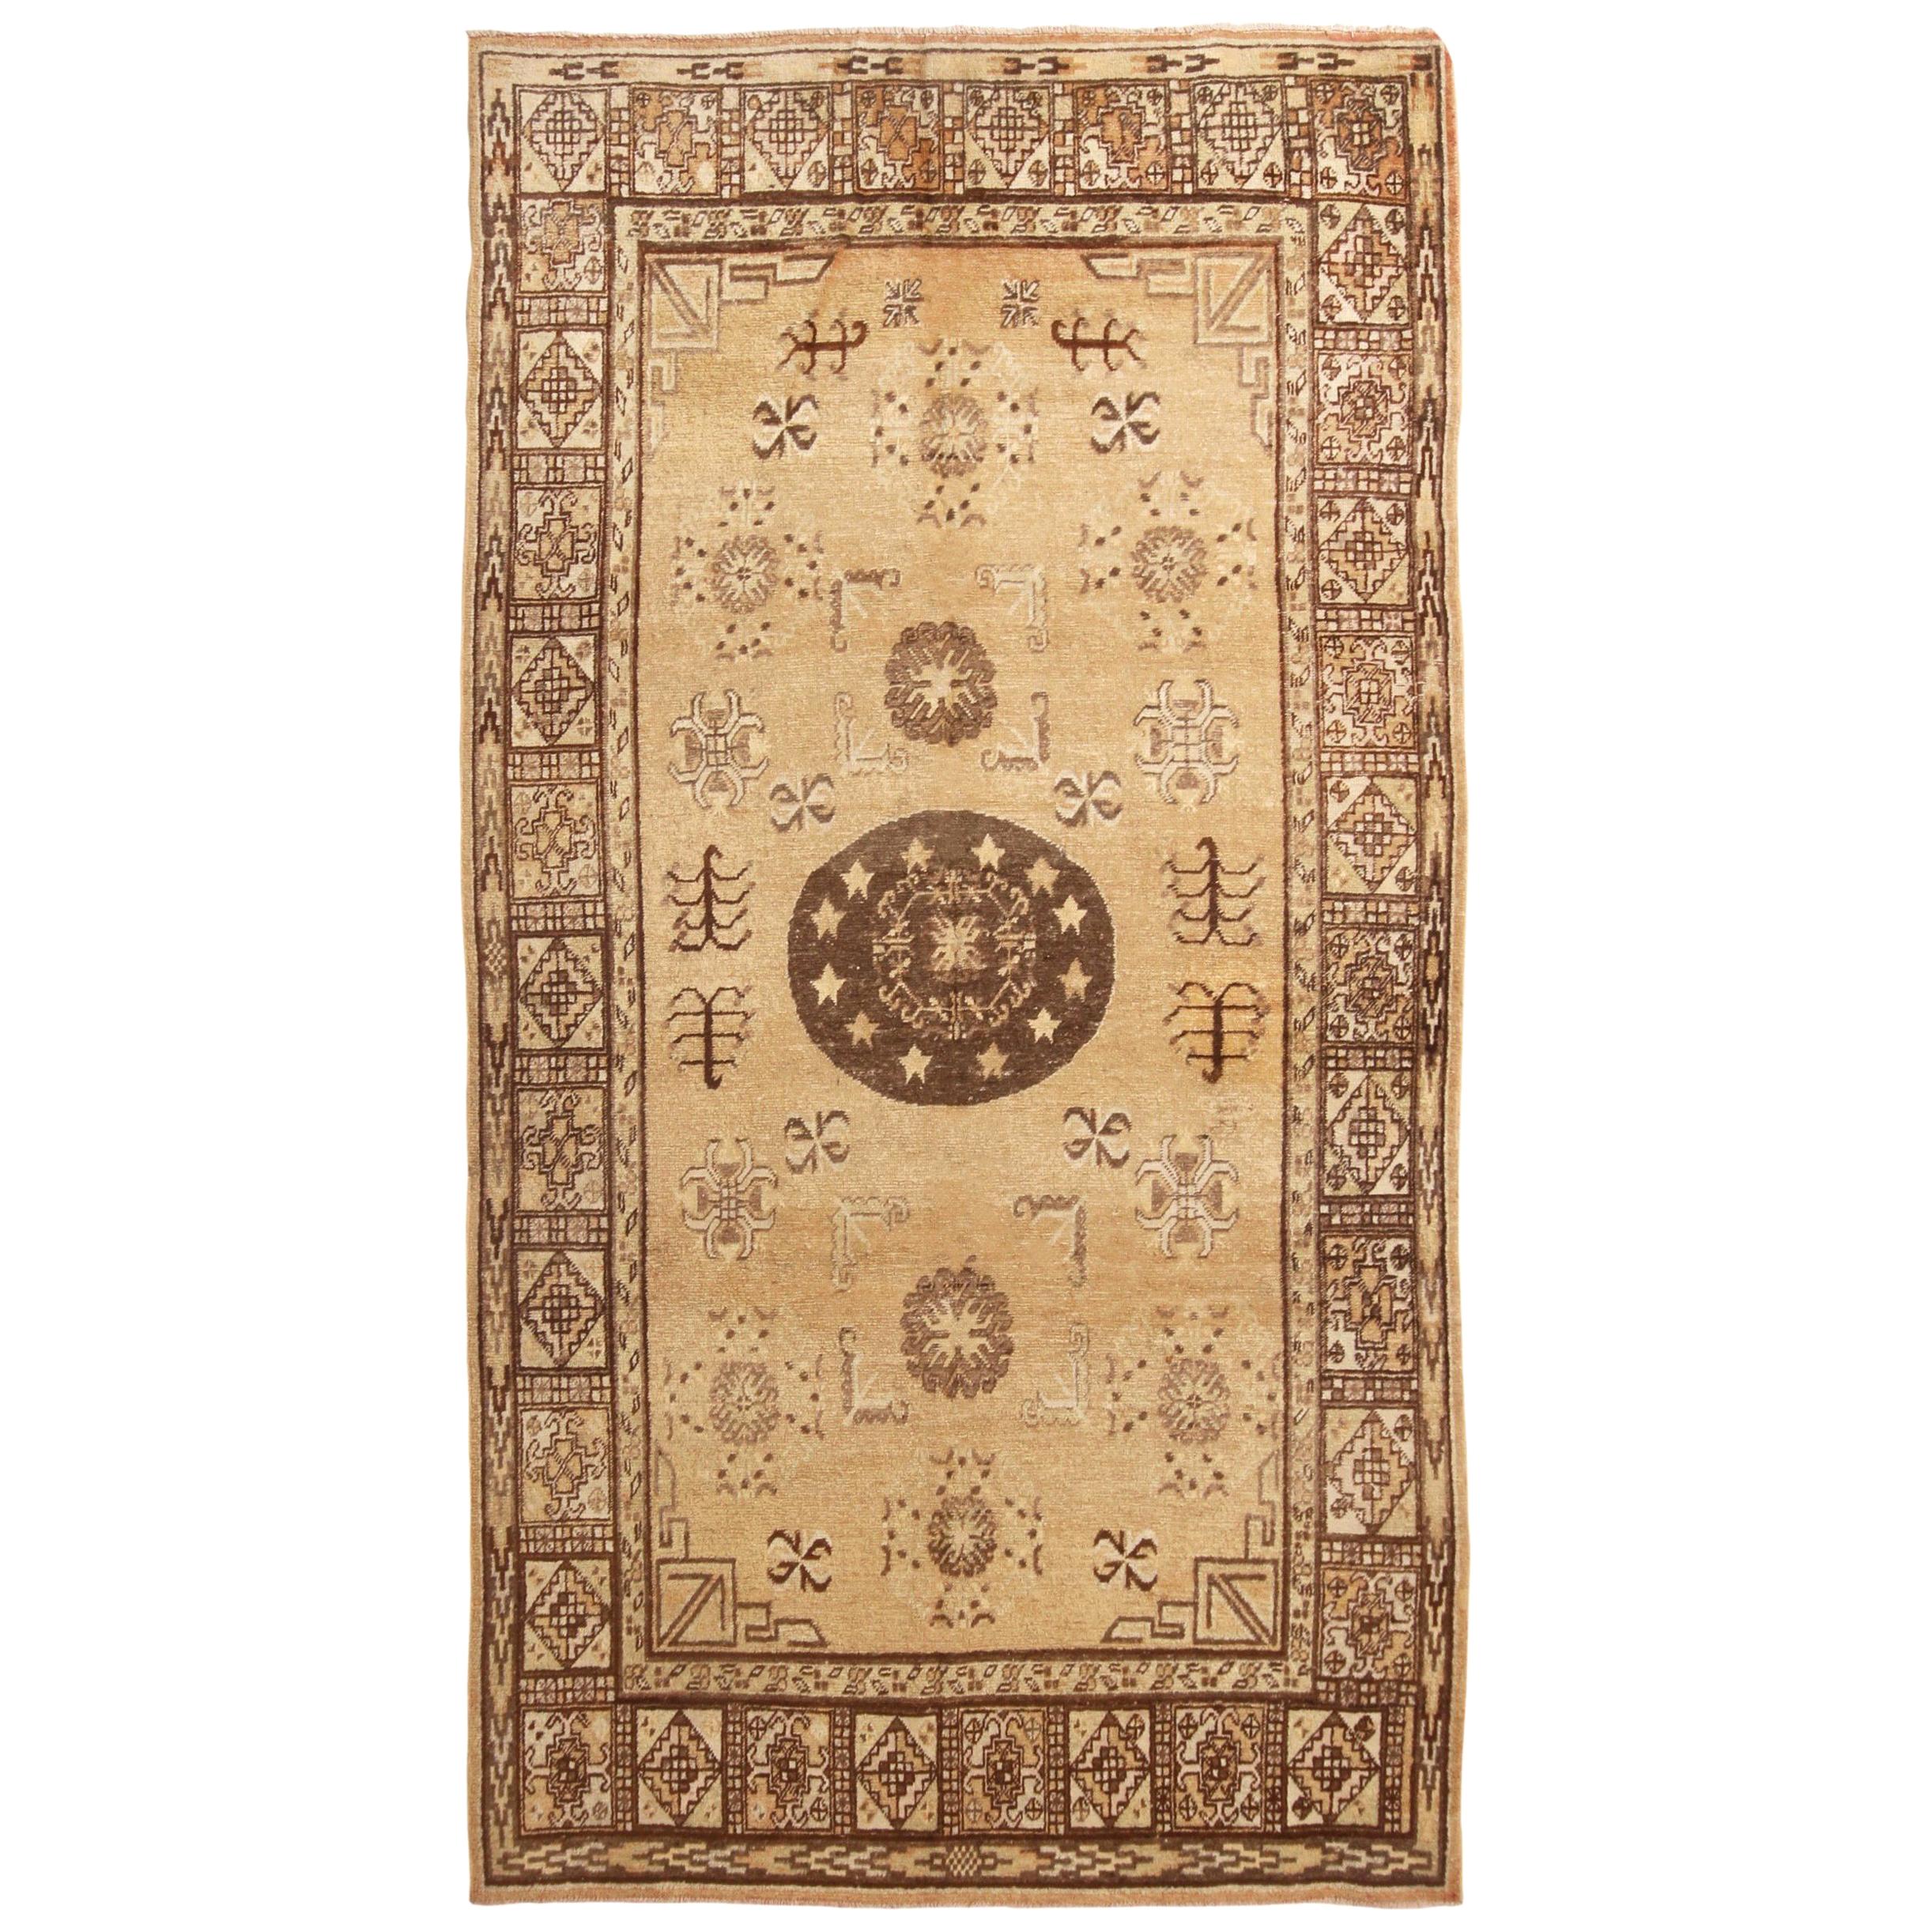 Midcentury Transitional Khotan Beige and Brown Wool Rug with Medallion